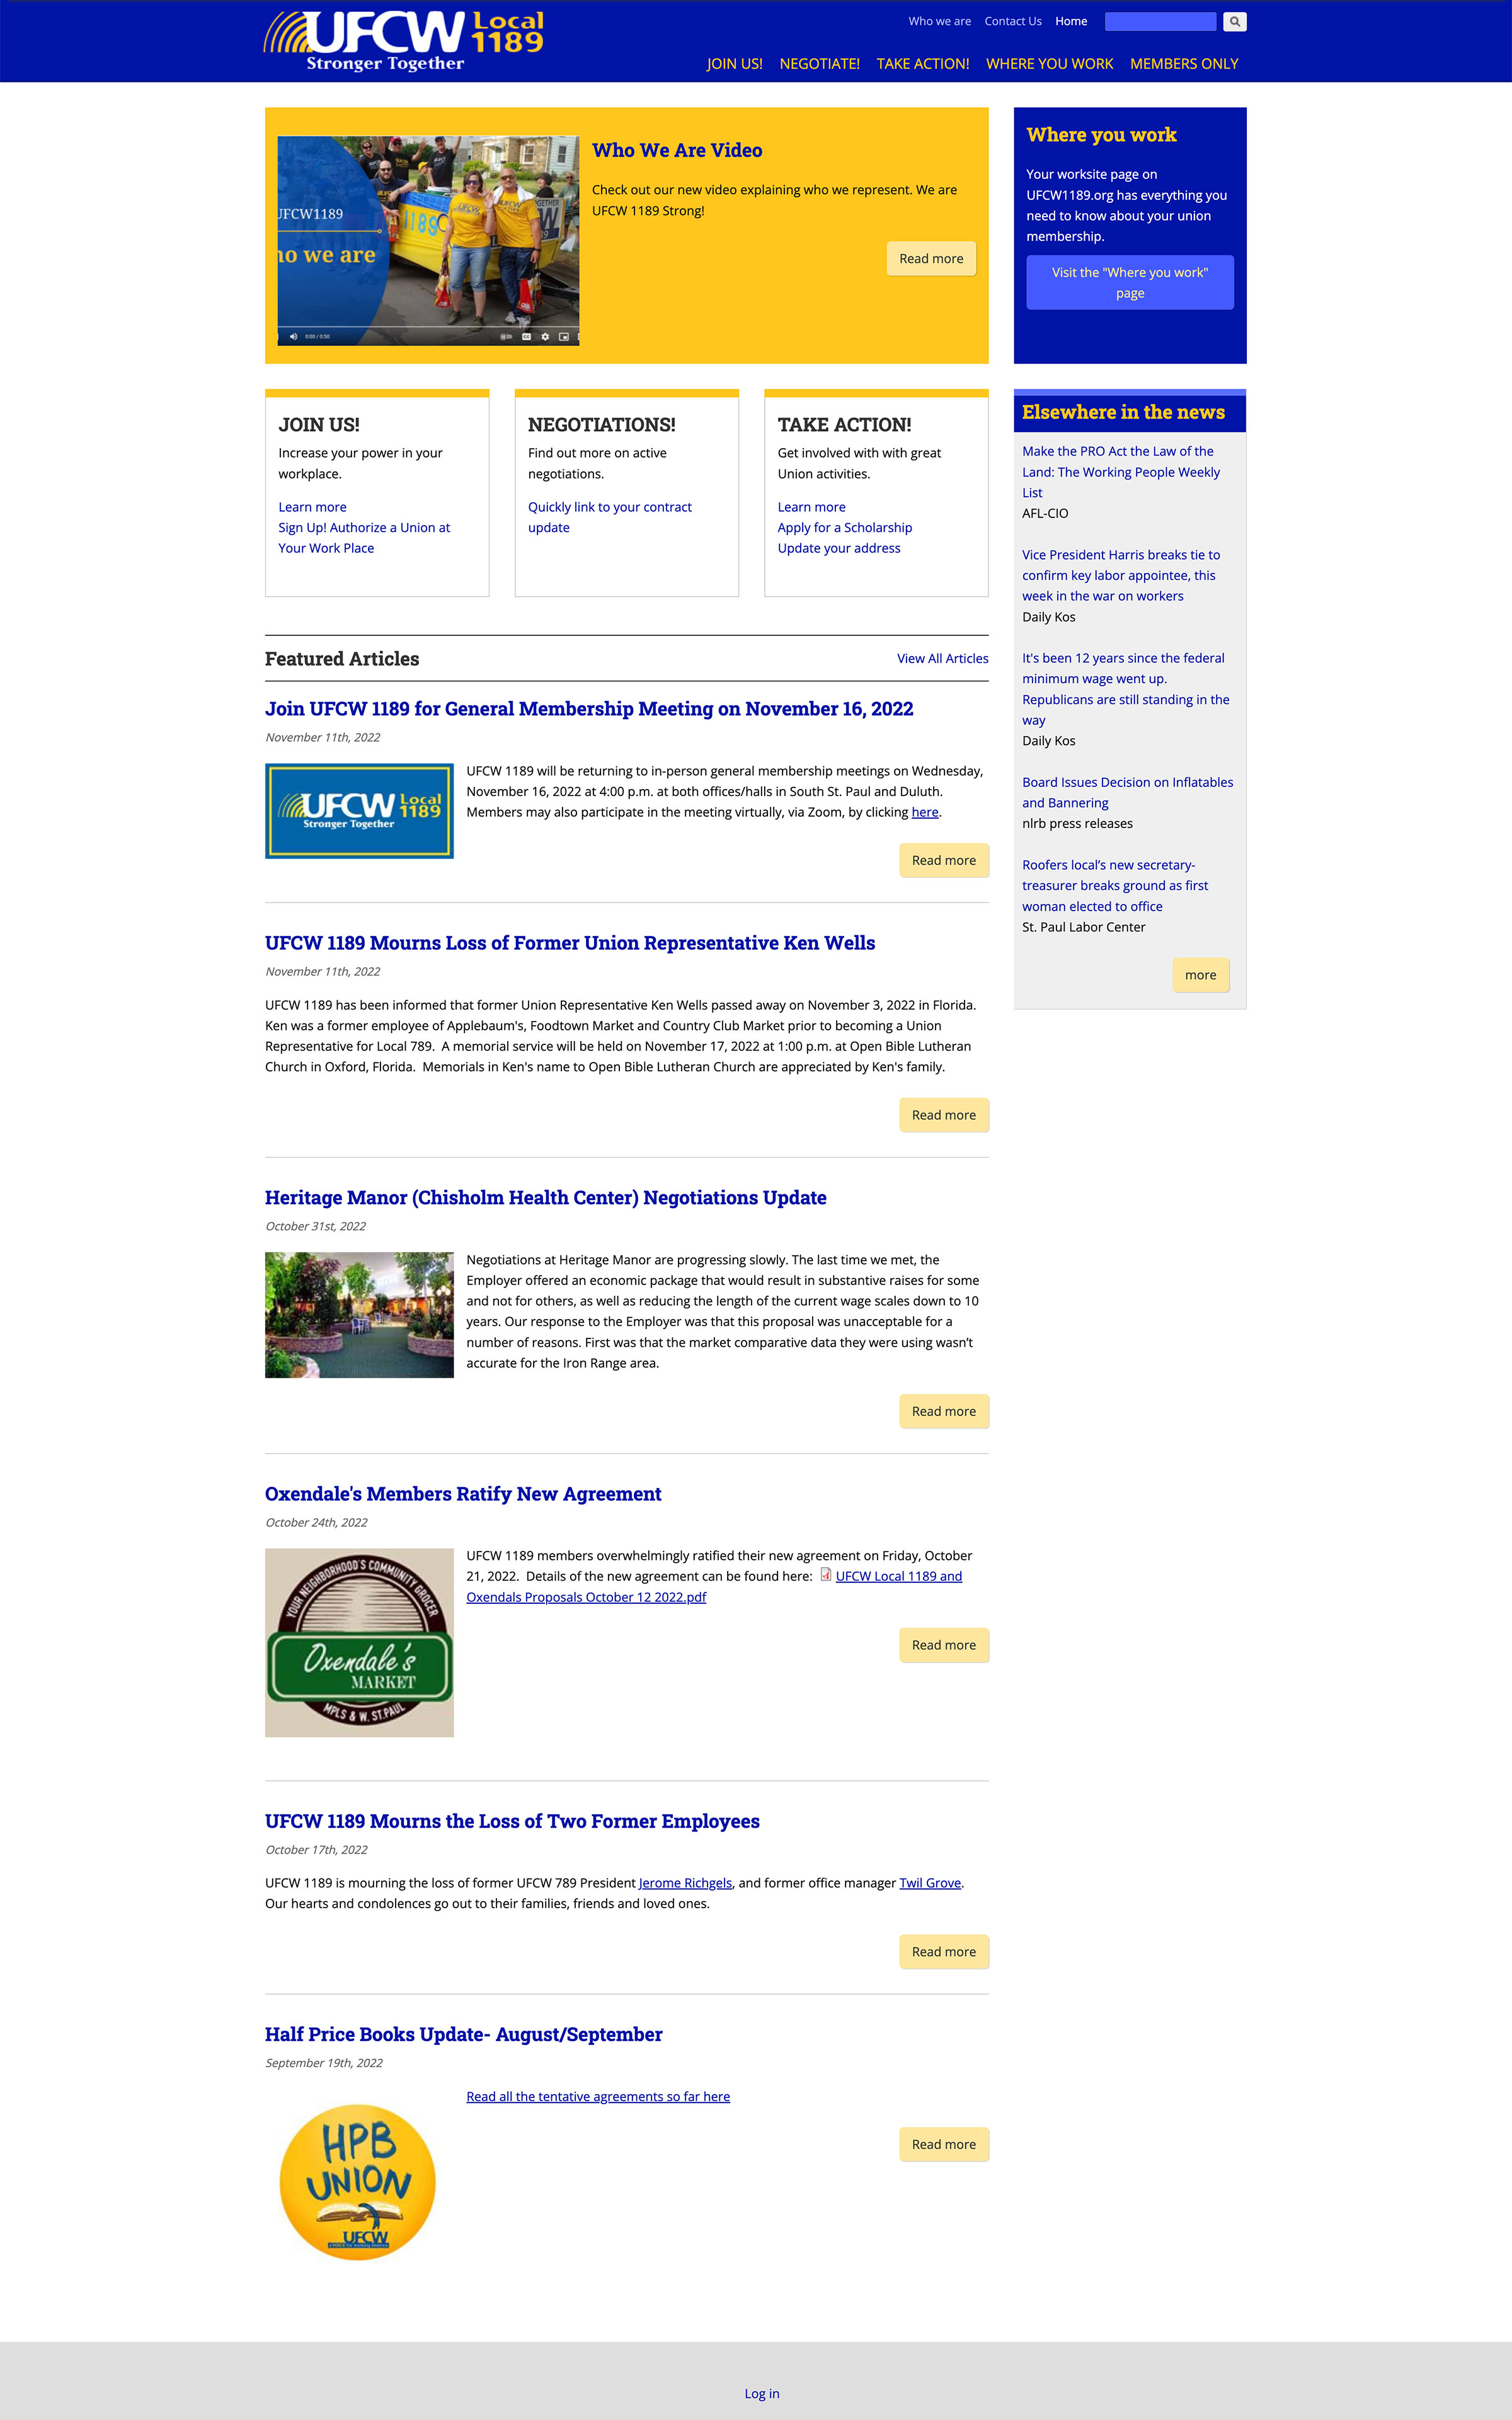 old UFCW homepage